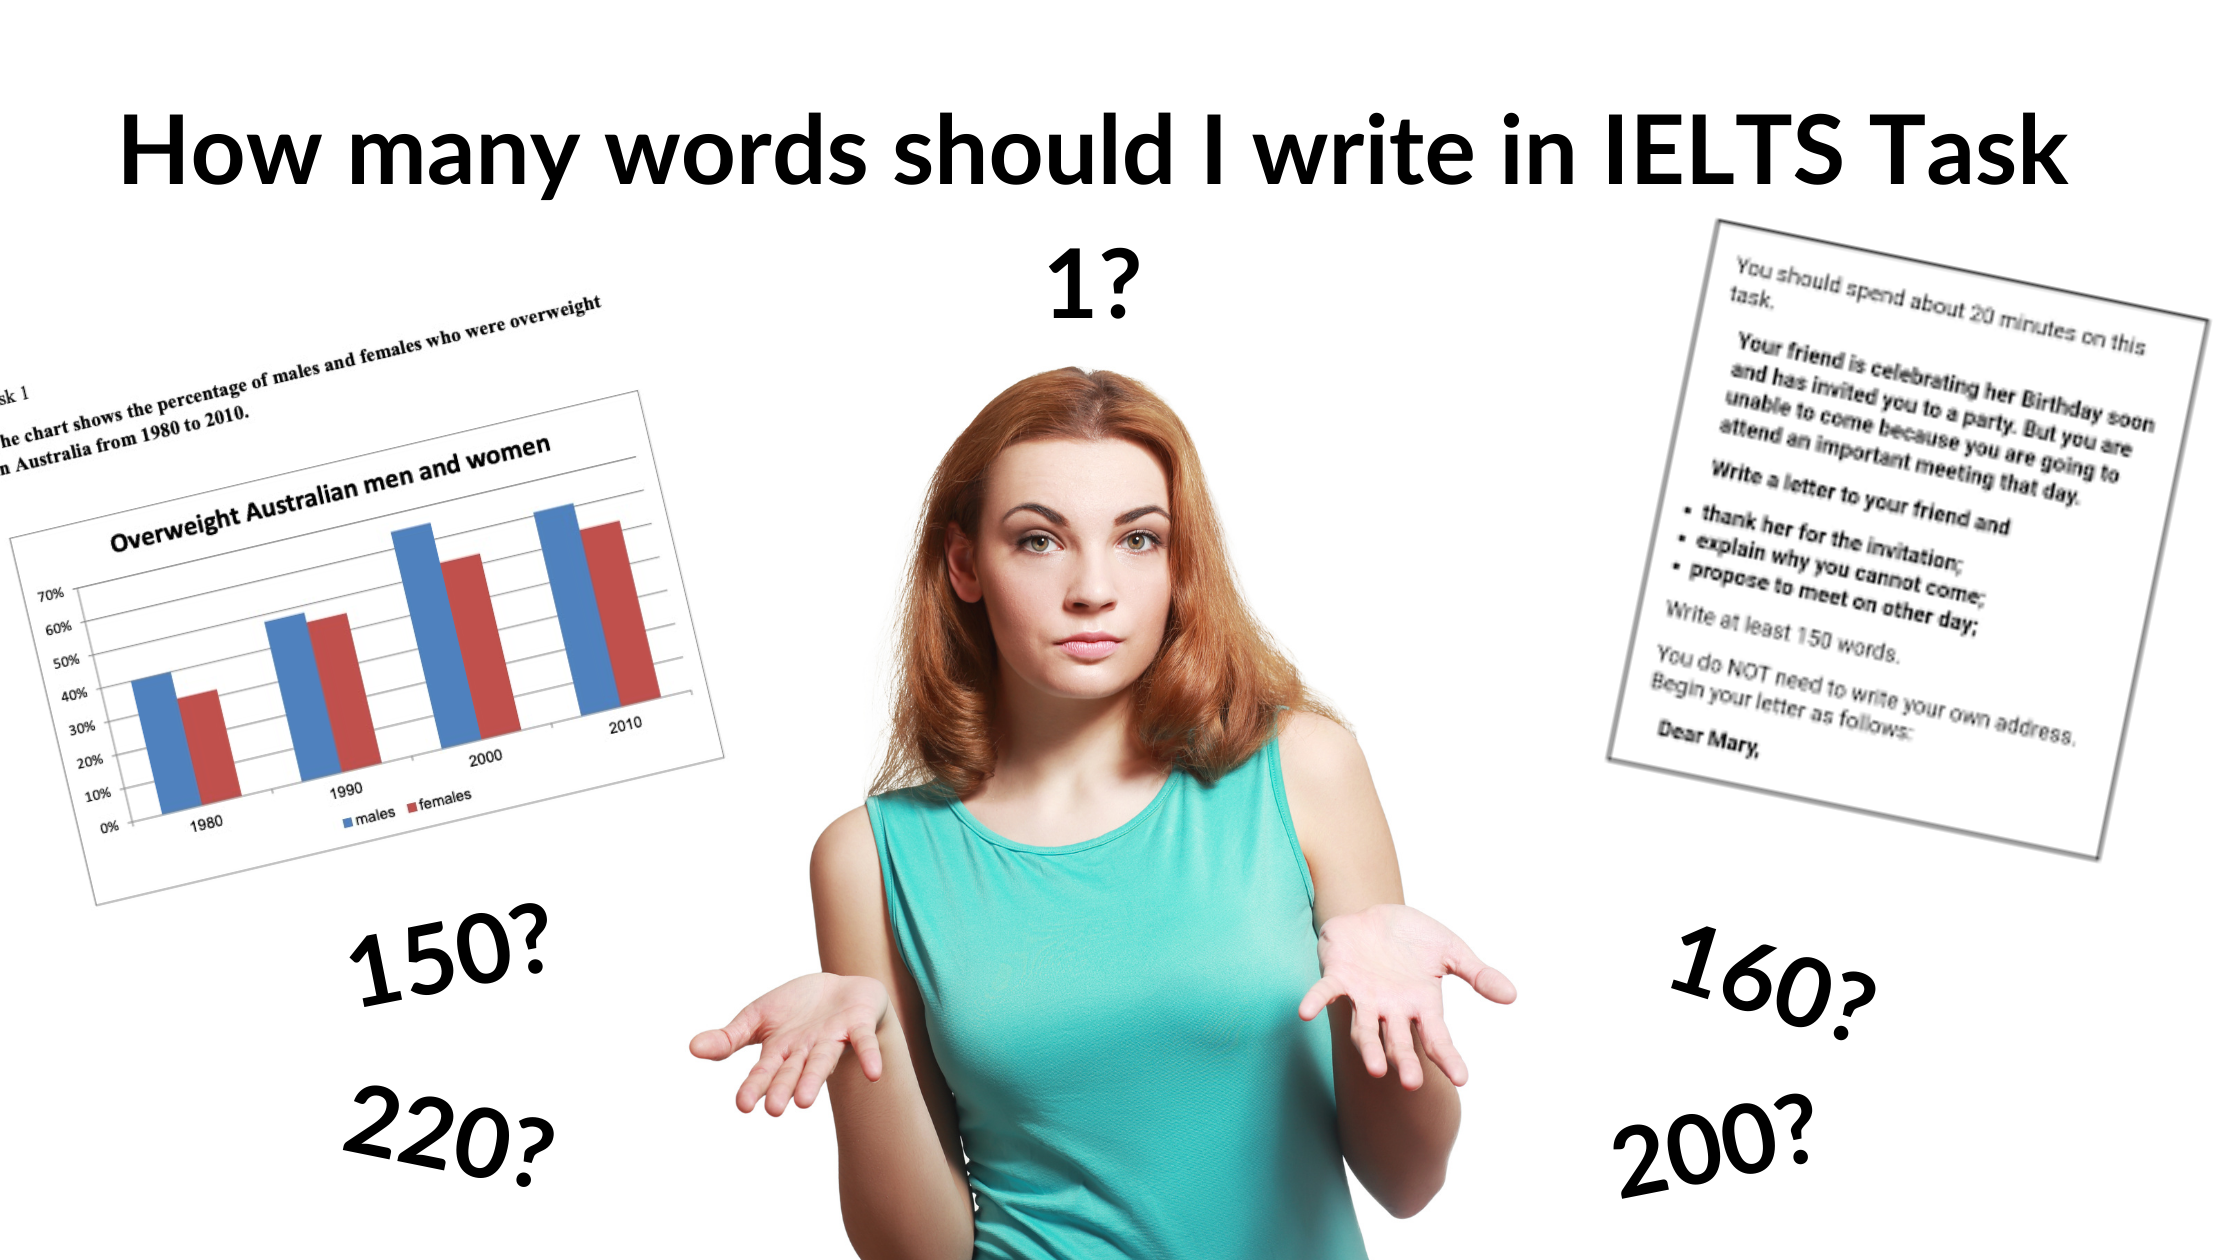 Can I write 200 words in IELTS writing task 1?